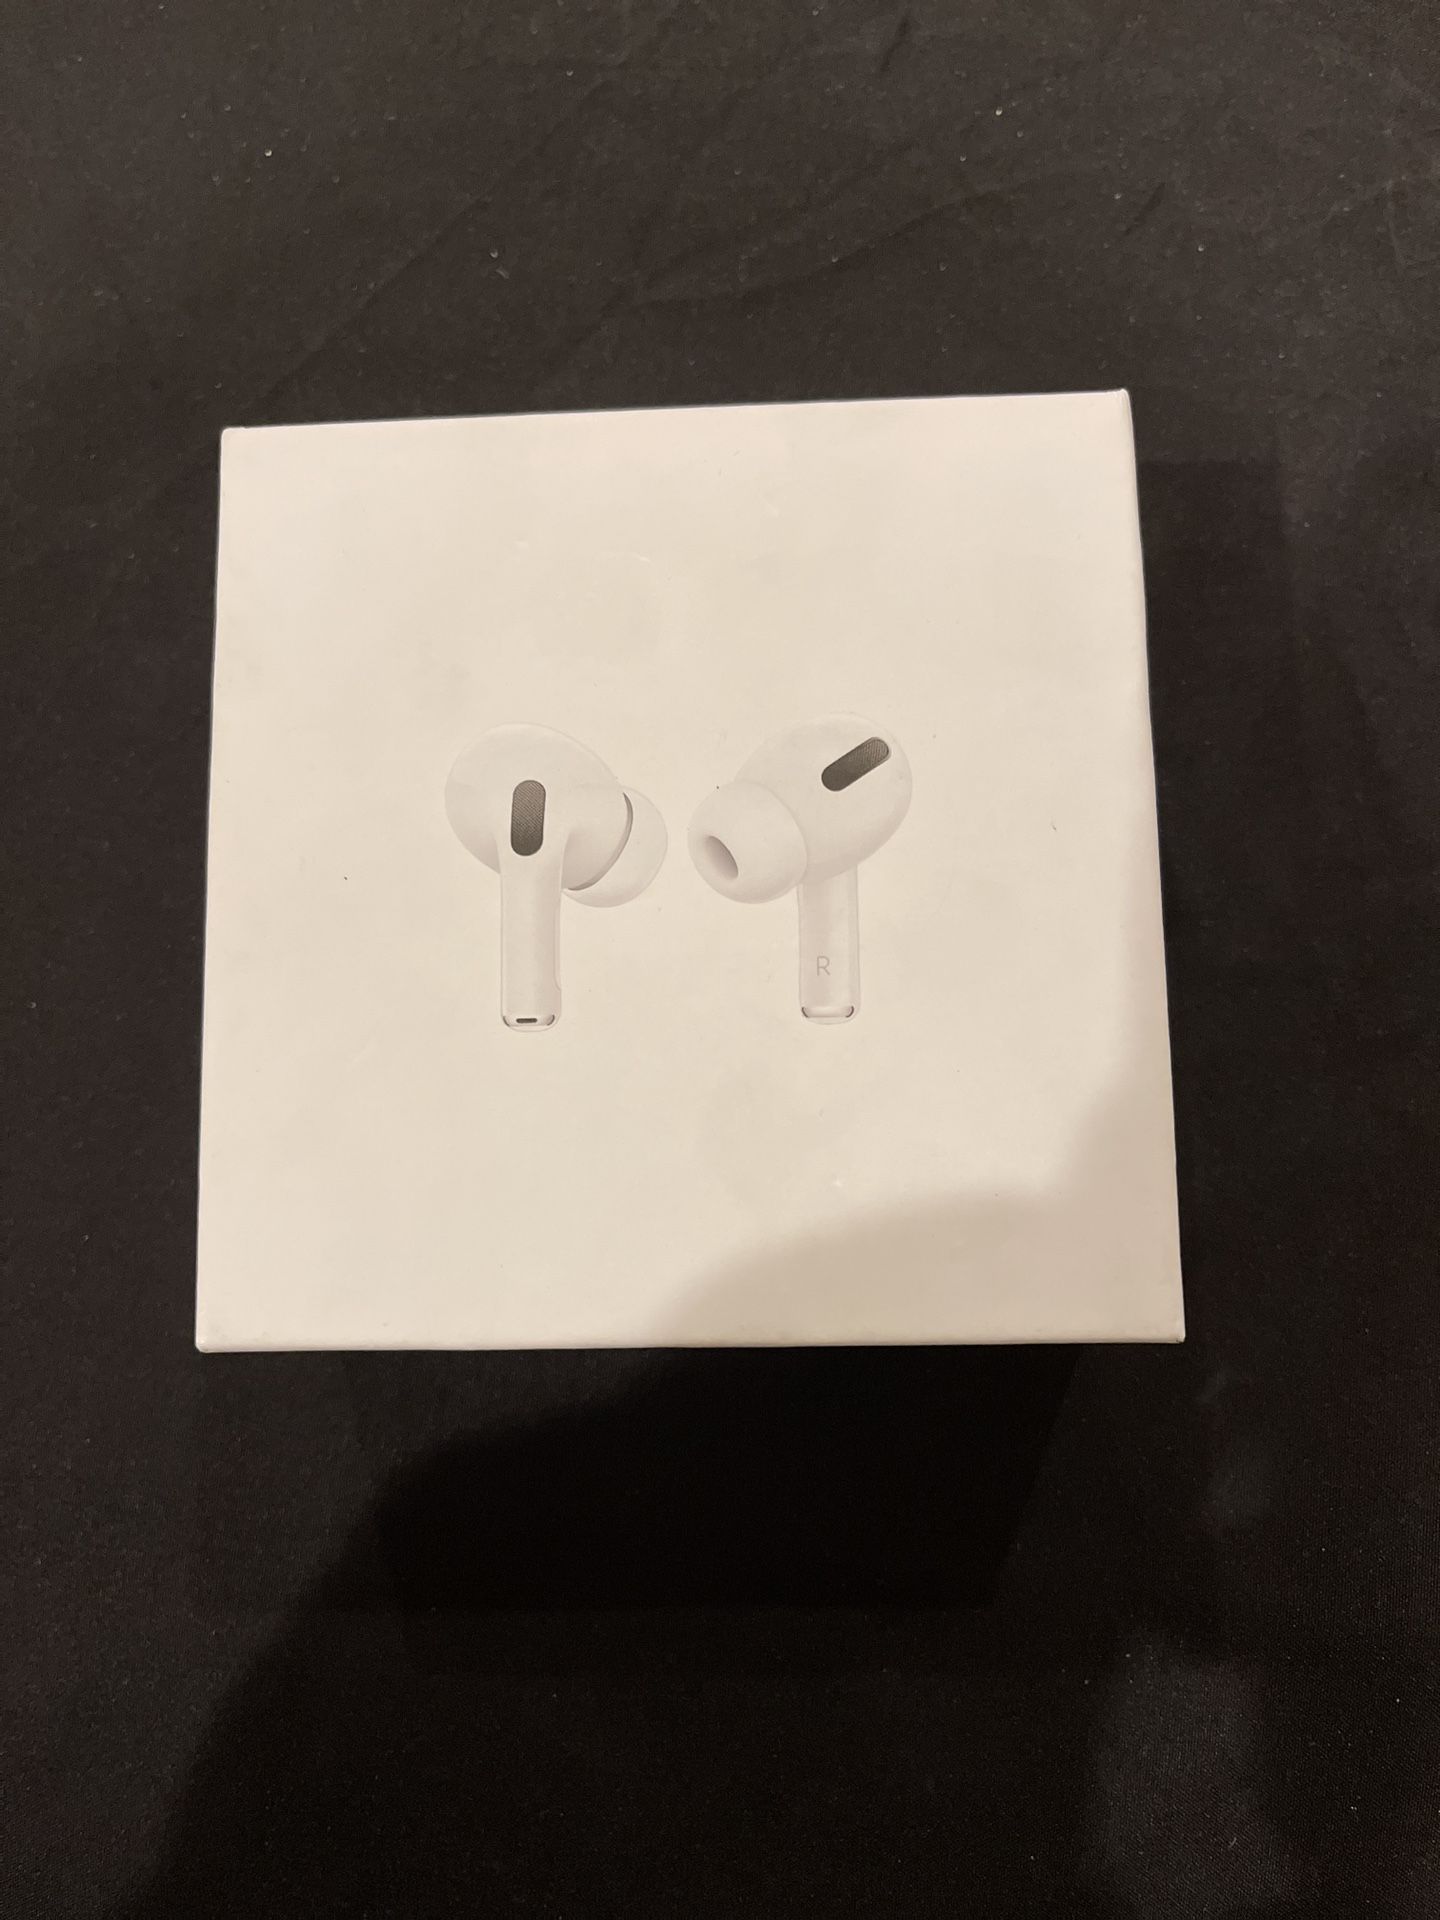 Apple AirPods Pro w/Charging Case